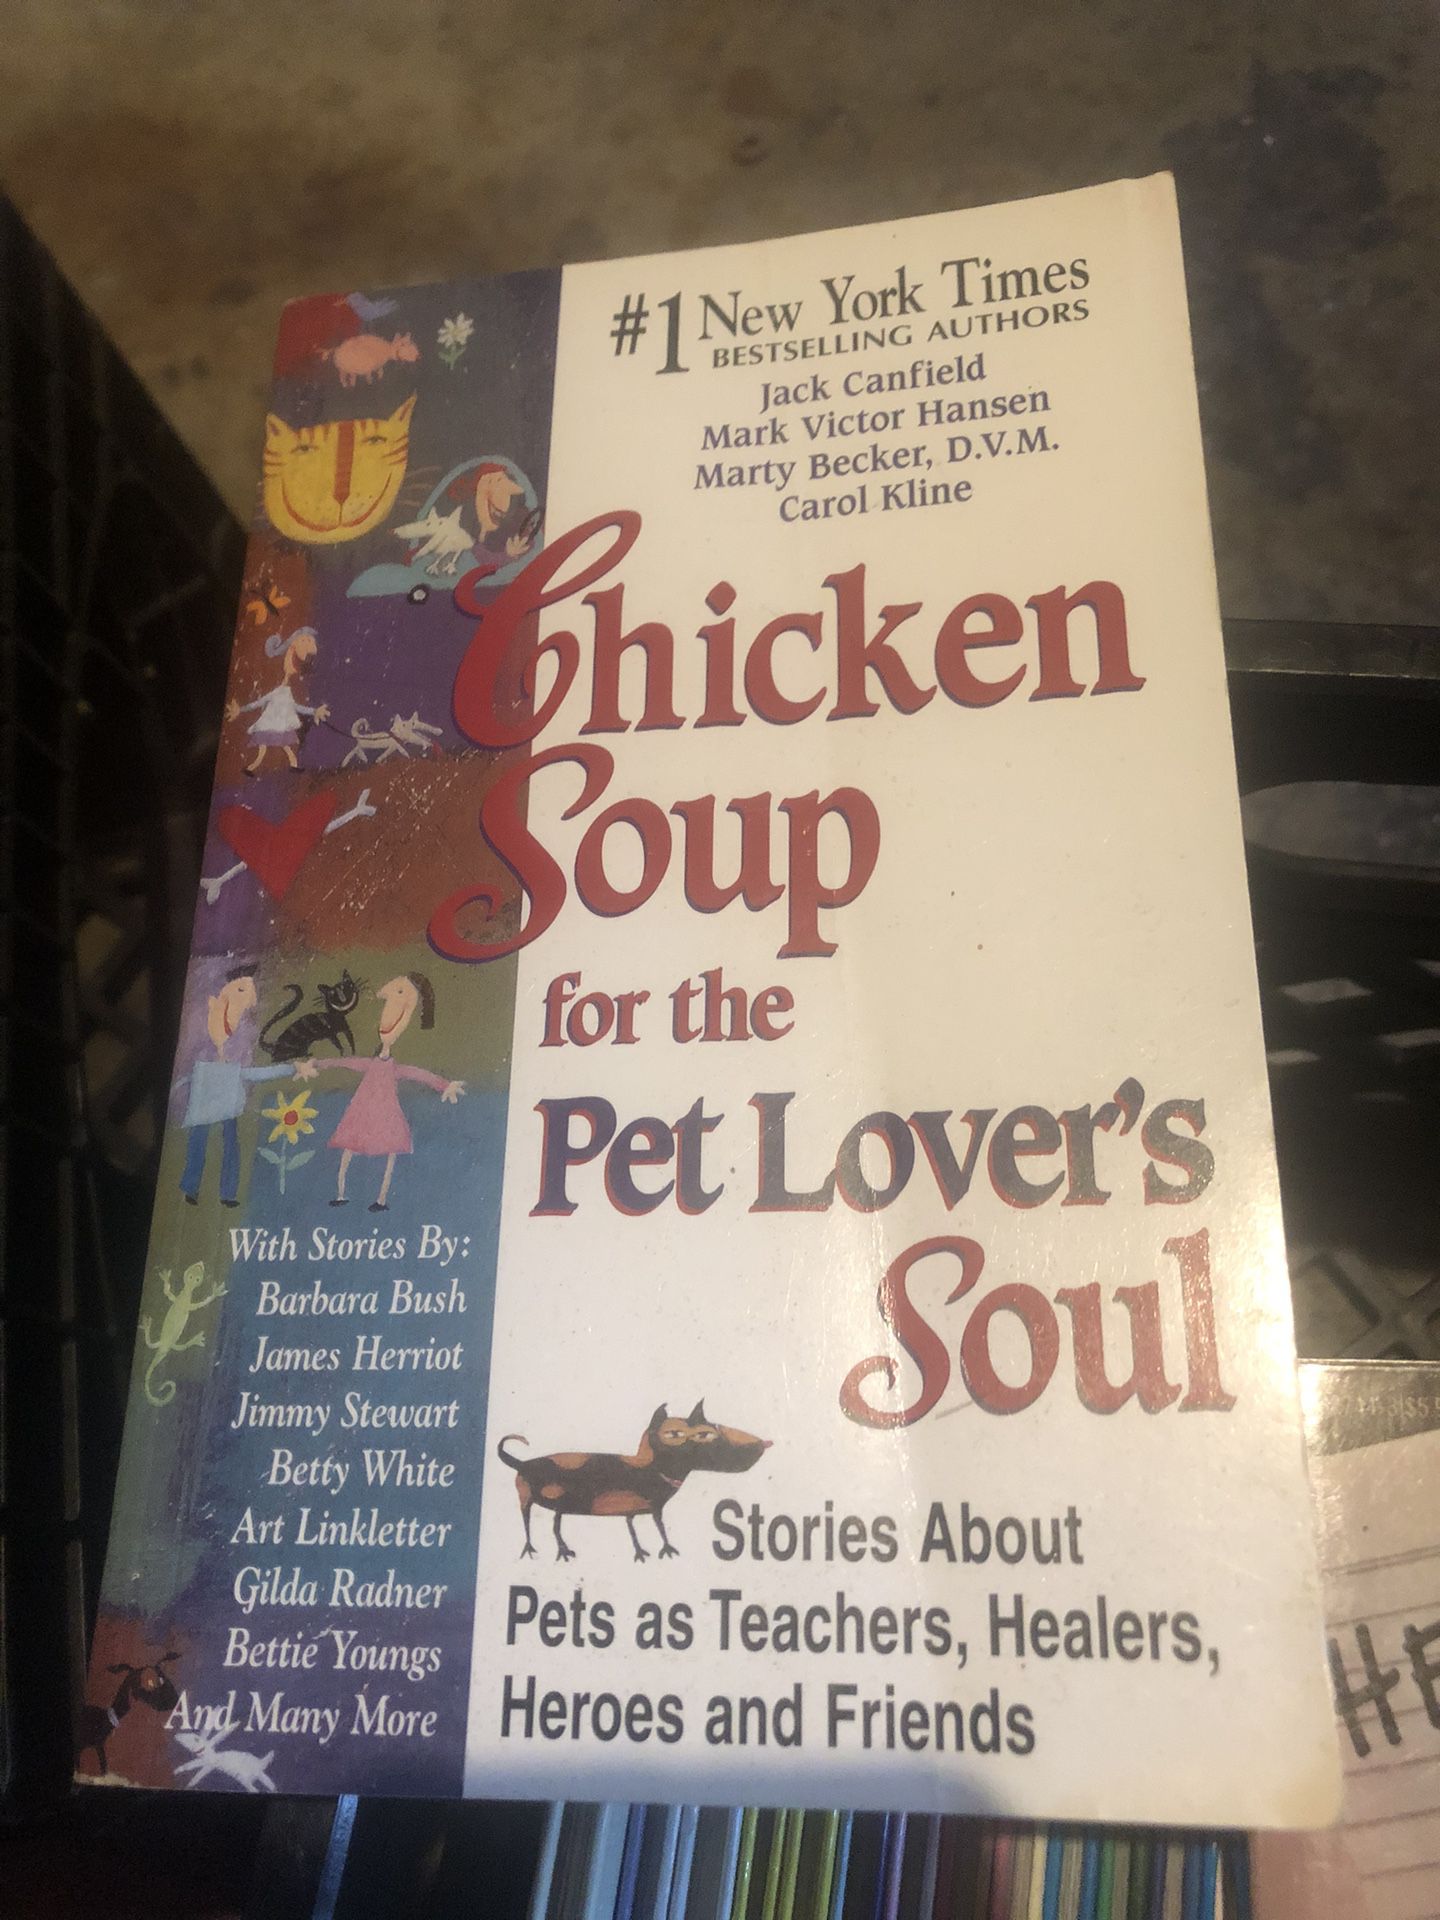 Chicken Soup For Pet Lovers Soul 